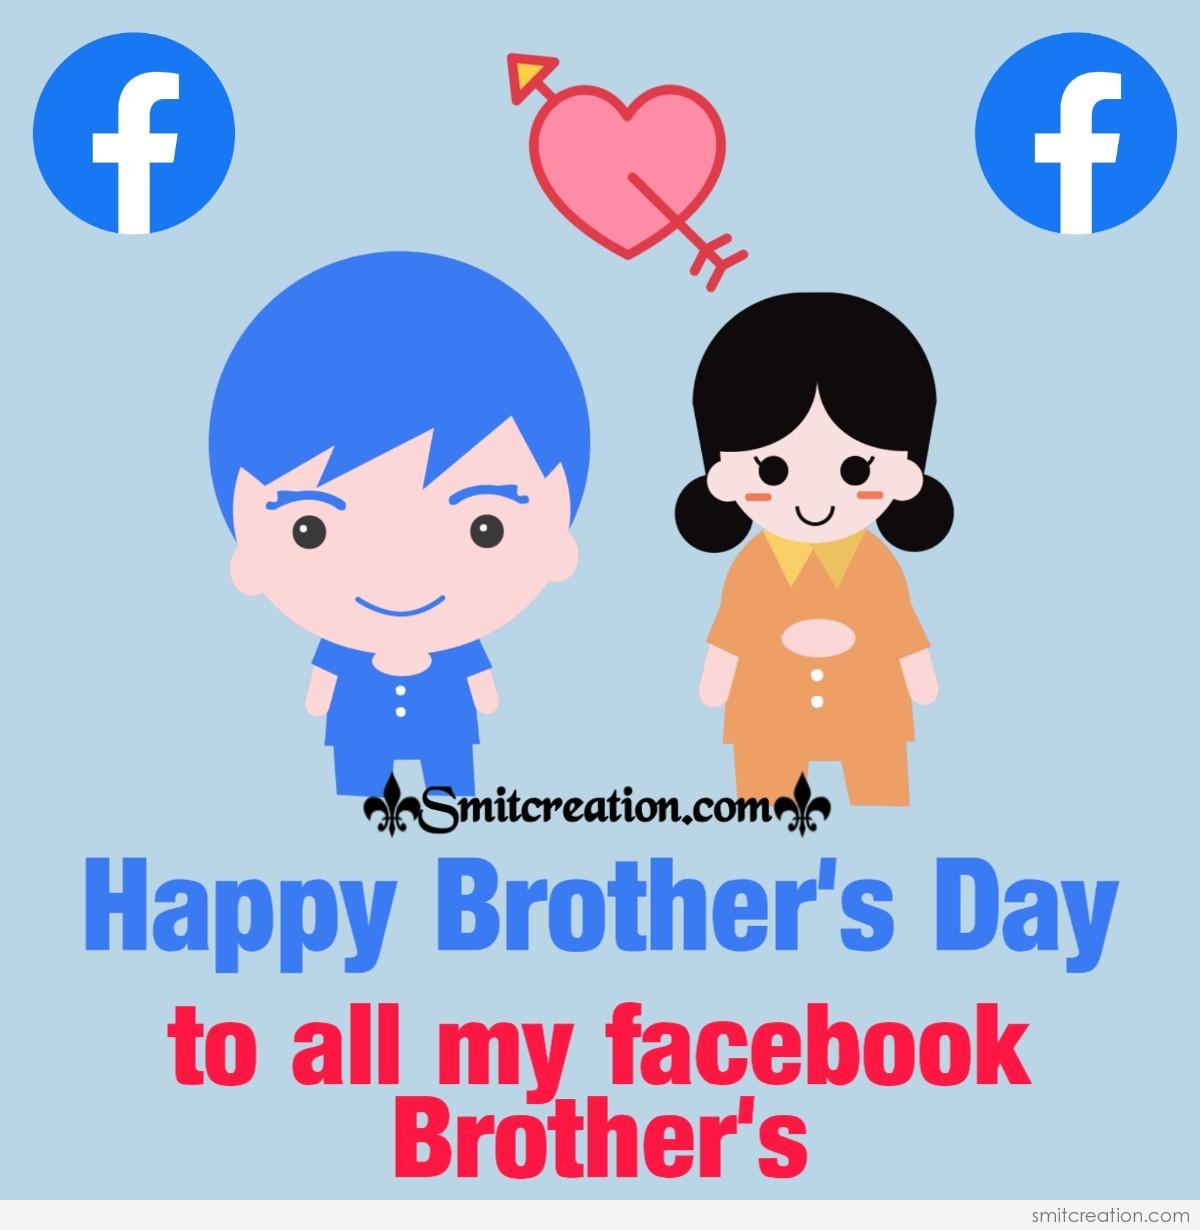 The Ultimate Collection of Over 999 Happy Brothers Day Images in Full